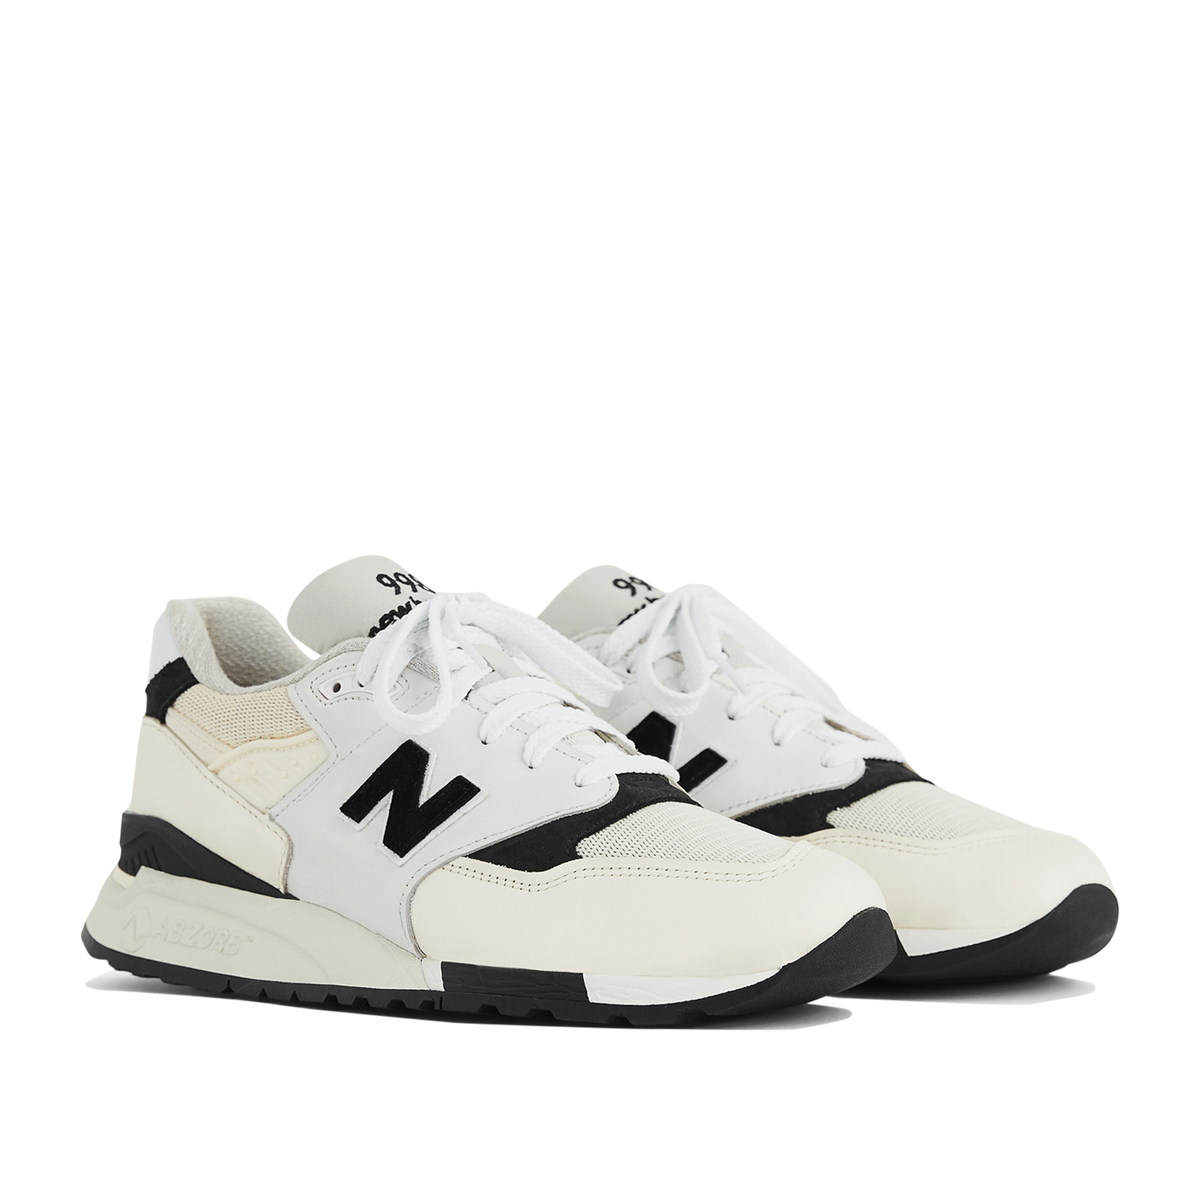 998 Made in USA - White Black